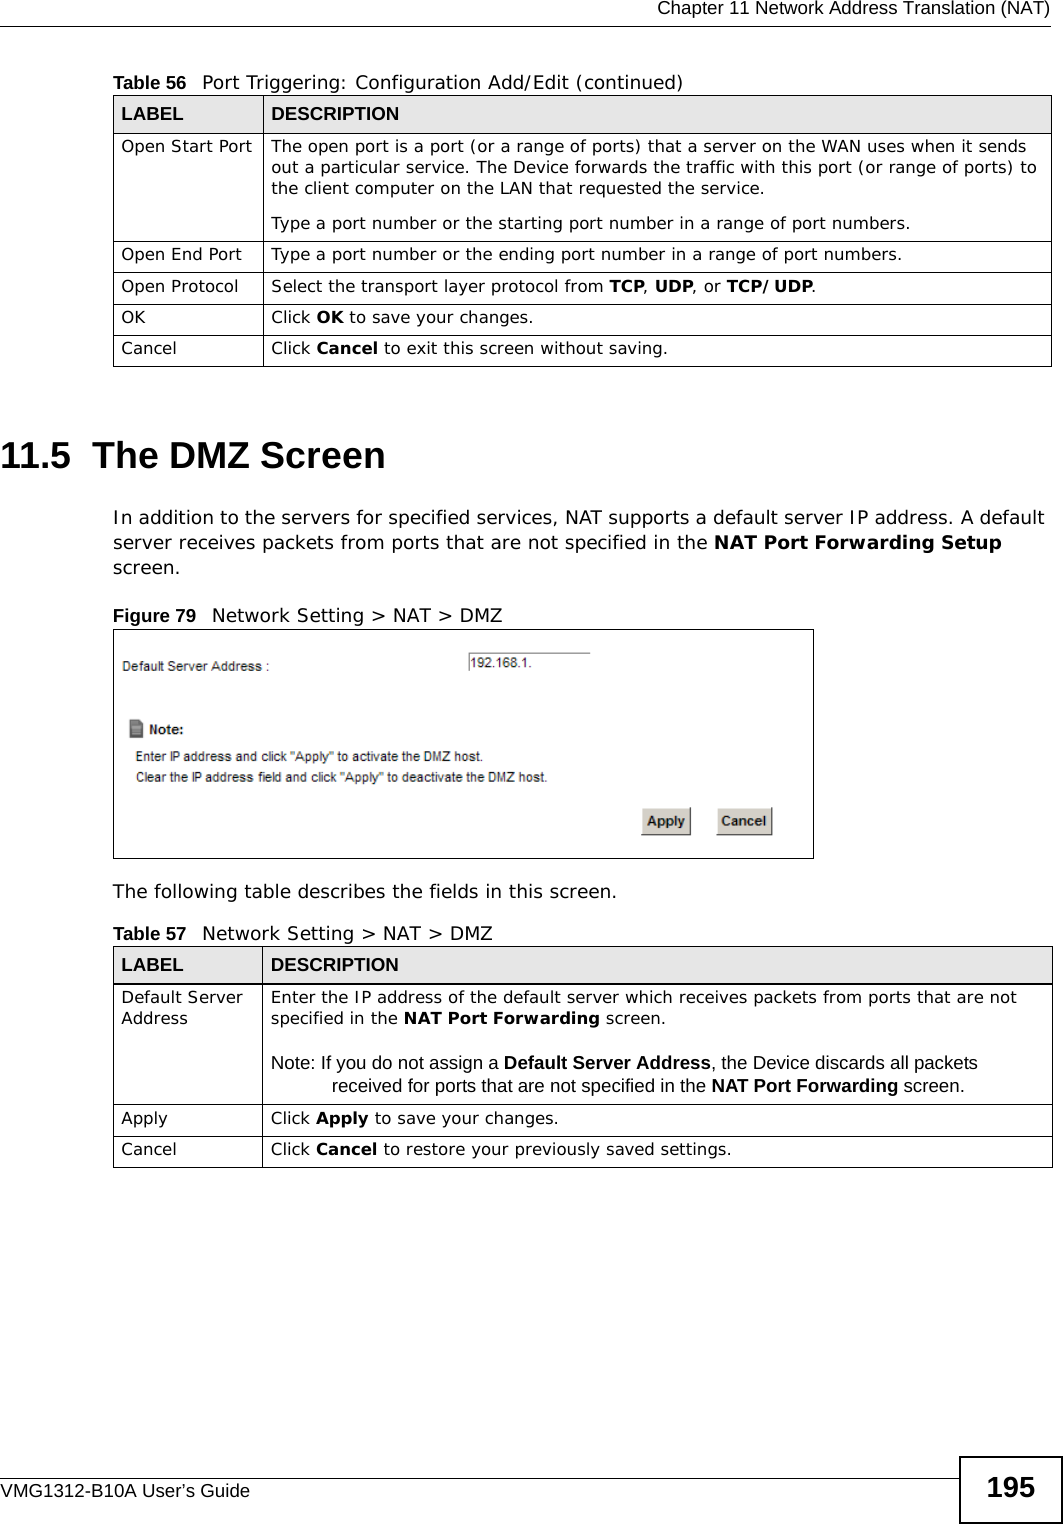  Chapter 11 Network Address Translation (NAT)VMG1312-B10A User’s Guide 19511.5  The DMZ ScreenIn addition to the servers for specified services, NAT supports a default server IP address. A default server receives packets from ports that are not specified in the NAT Port Forwarding Setup screen.Figure 79   Network Setting &gt; NAT &gt; DMZ The following table describes the fields in this screen. Open Start Port The open port is a port (or a range of ports) that a server on the WAN uses when it sends out a particular service. The Device forwards the traffic with this port (or range of ports) to the client computer on the LAN that requested the service. Type a port number or the starting port number in a range of port numbers.Open End Port  Type a port number or the ending port number in a range of port numbers.Open Protocol Select the transport layer protocol from TCP, UDP, or TCP/UDP.OK Click OK to save your changes.Cancel Click Cancel to exit this screen without saving.Table 56   Port Triggering: Configuration Add/Edit (continued)LABEL DESCRIPTIONTable 57   Network Setting &gt; NAT &gt; DMZLABEL DESCRIPTIONDefault Server Address Enter the IP address of the default server which receives packets from ports that are not specified in the NAT Port Forwarding screen. Note: If you do not assign a Default Server Address, the Device discards all packets received for ports that are not specified in the NAT Port Forwarding screen.Apply Click Apply to save your changes.Cancel Click Cancel to restore your previously saved settings.